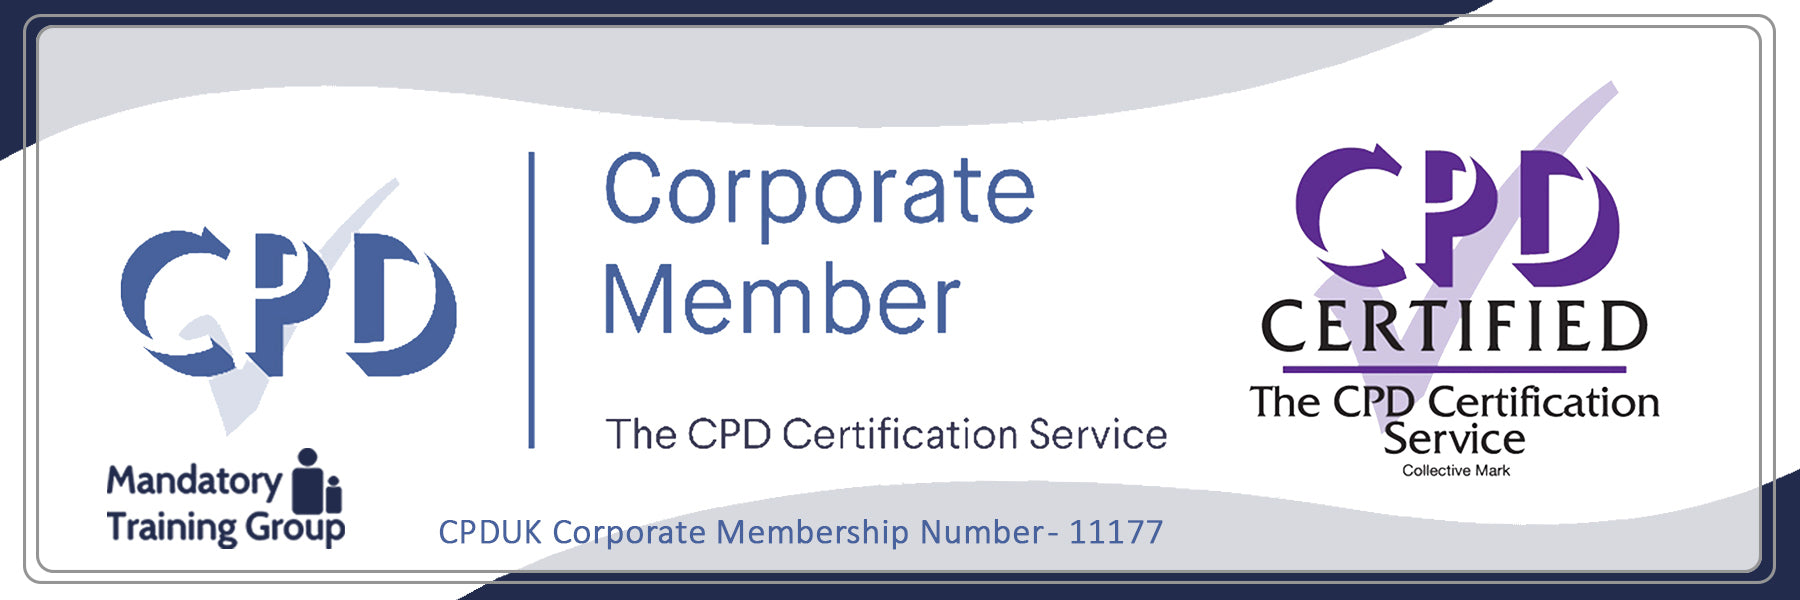 Annual Leave Procedures and Policy - Online CPD Course - The Mandatory Training Group UK -